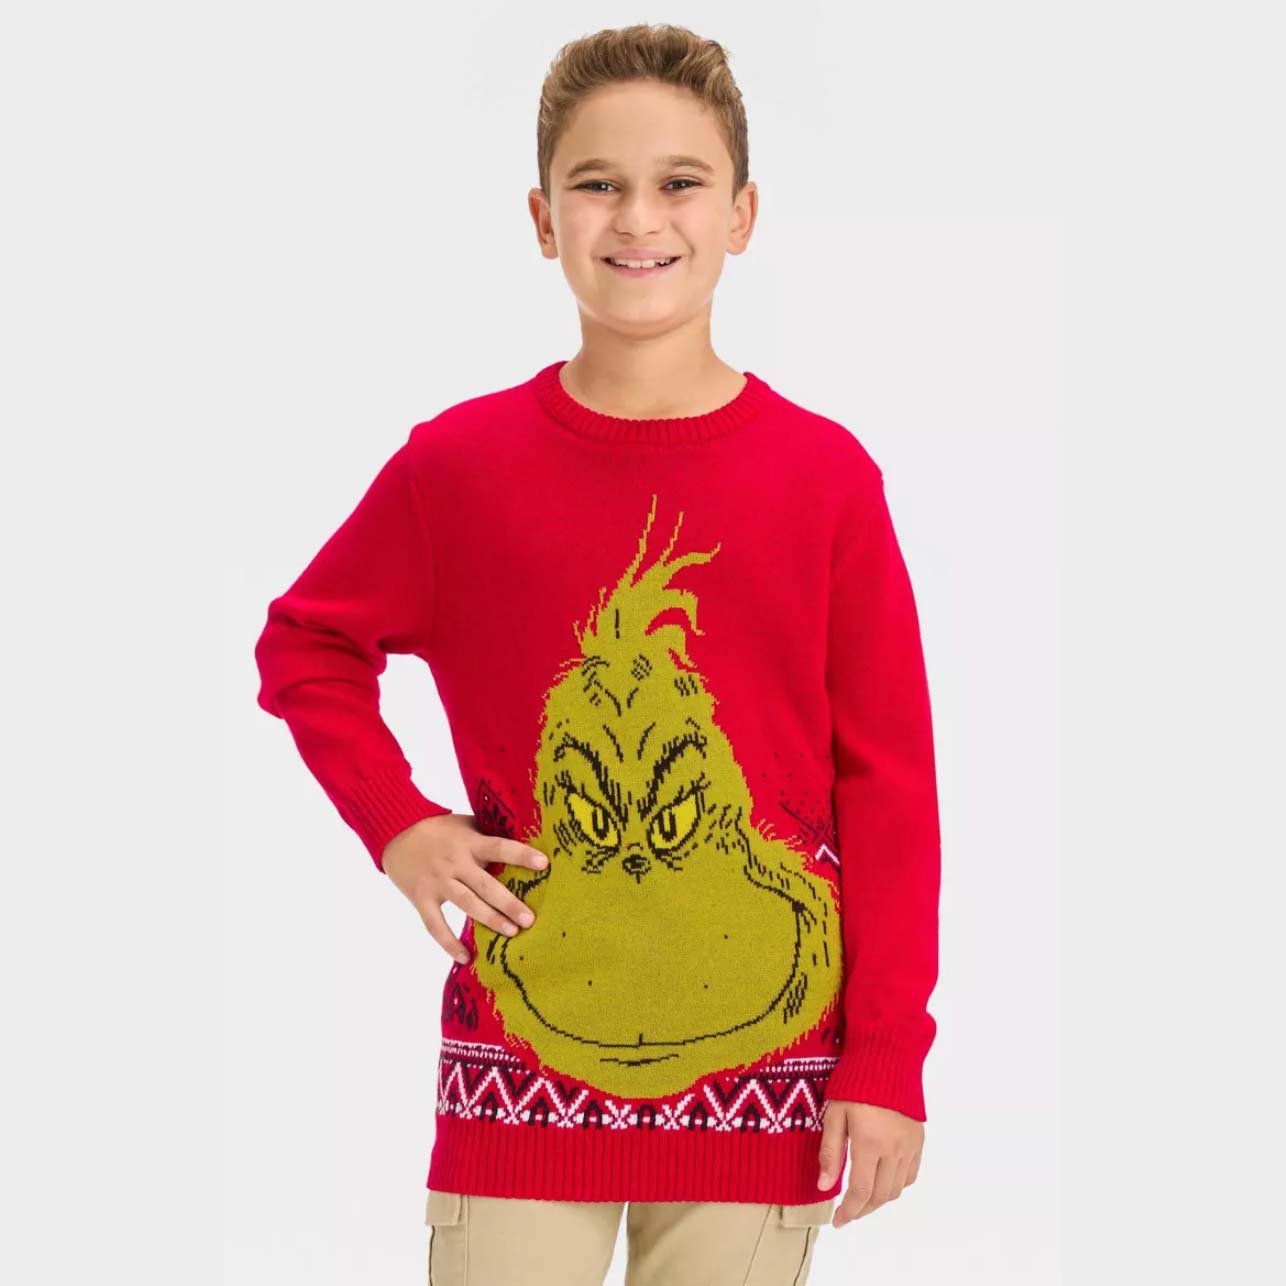 Boy wearing red The Grinch sweater